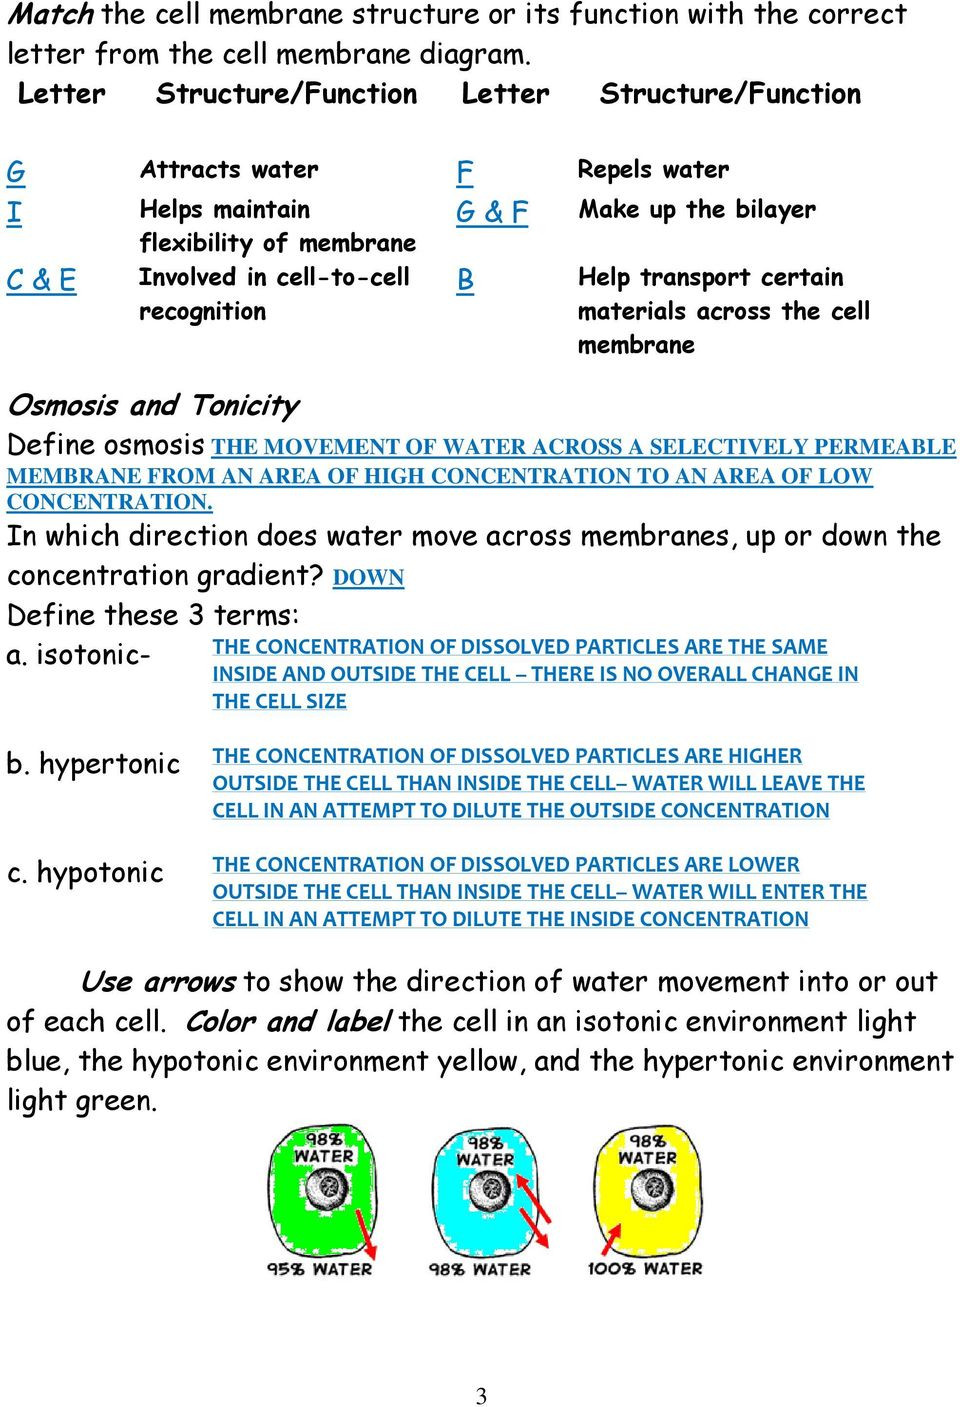 Osmosis and tonicity Worksheet Cell Membrane Coloring Worksheet Pdf Free Download